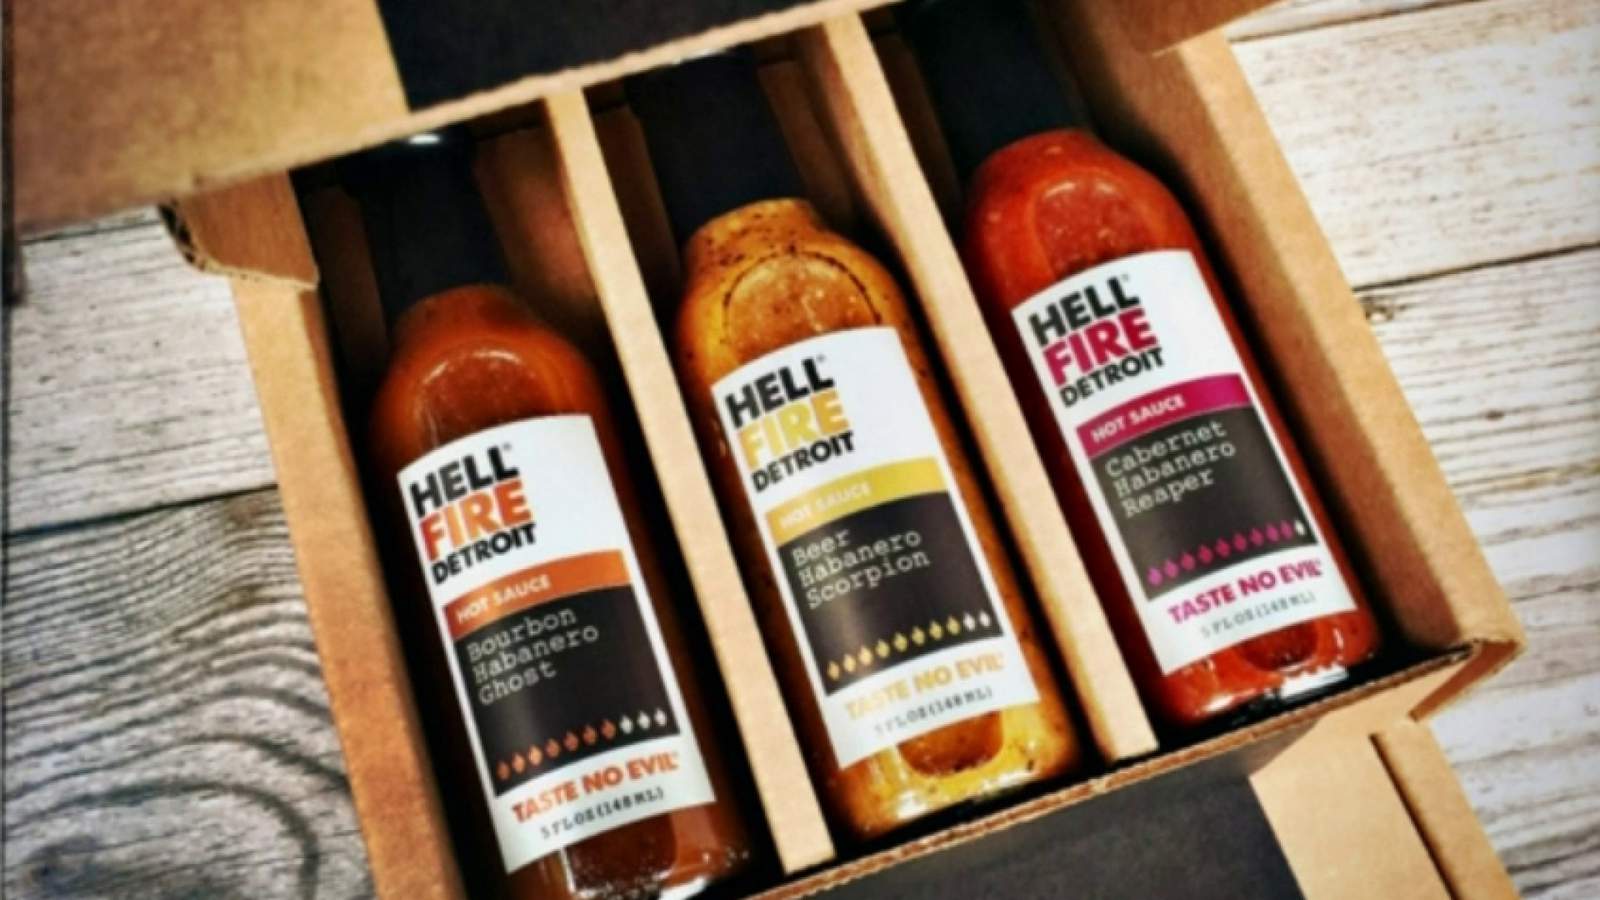 This local hot sauce company is getting noticed by top celebrities